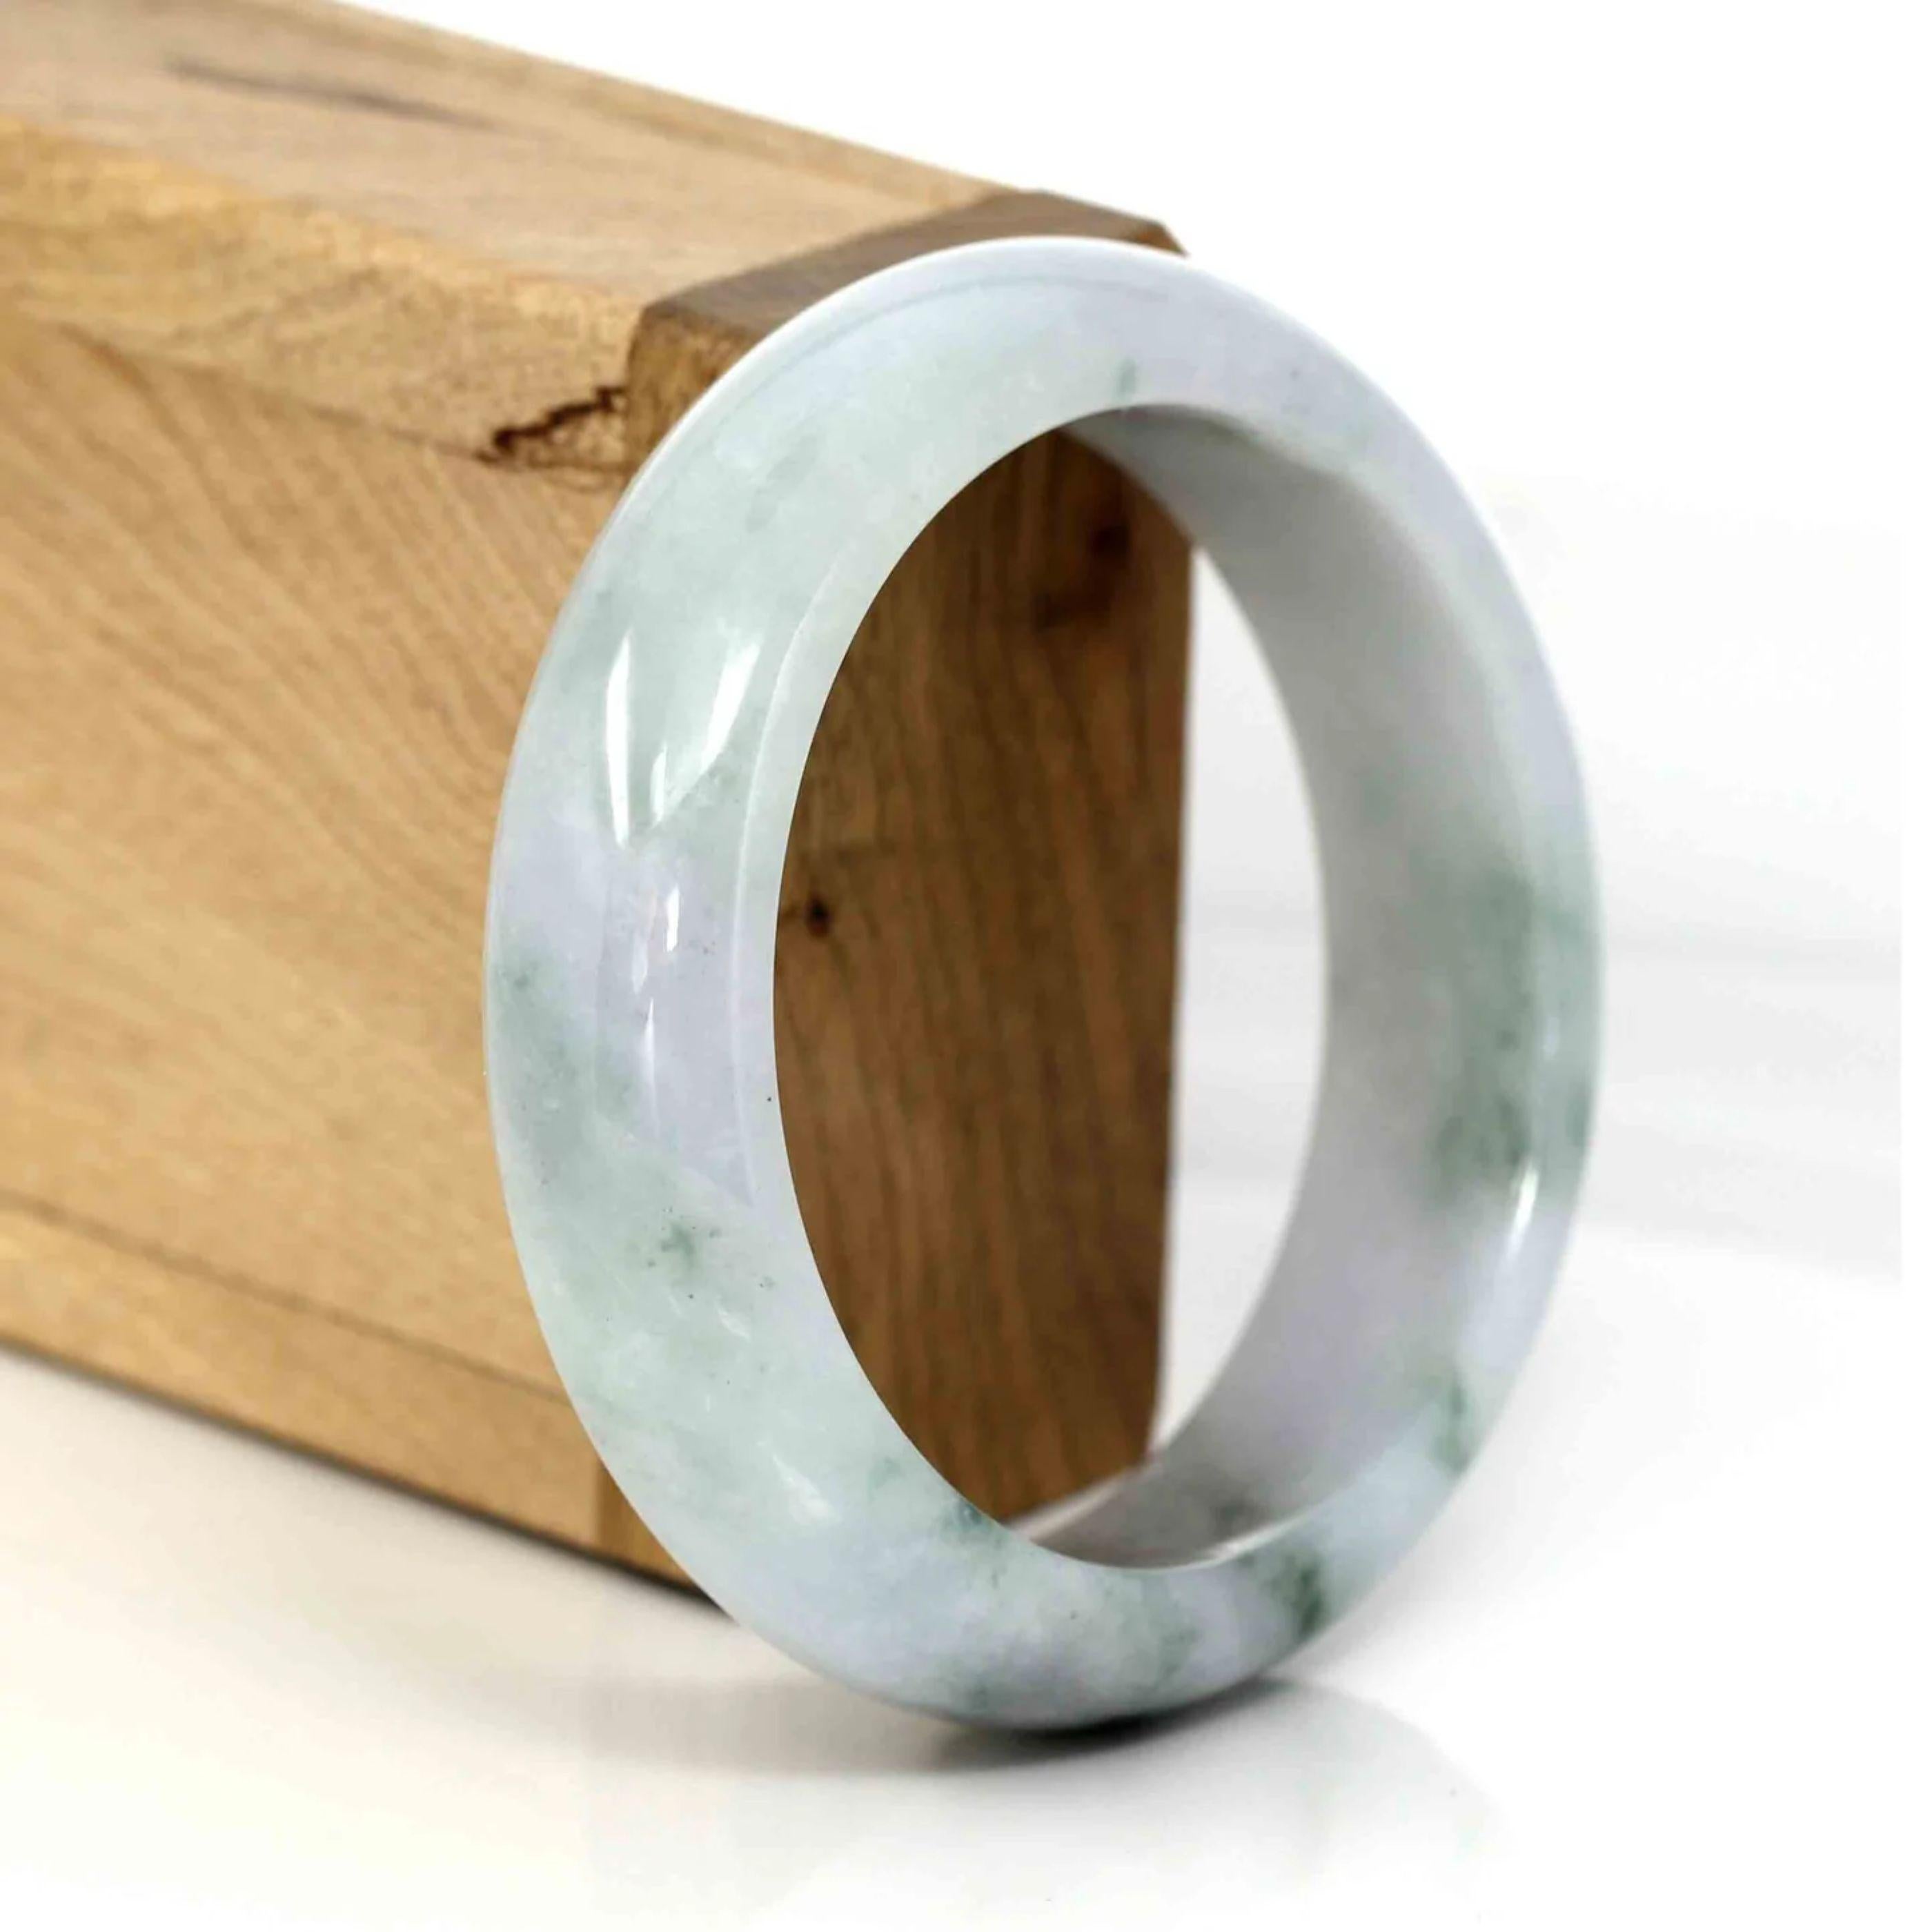 RealJade¨ Co. Classic Real Jade Jadeite Bangle Bracelet ( 57.5 mm )#562 In New Condition For Sale In Portland, OR